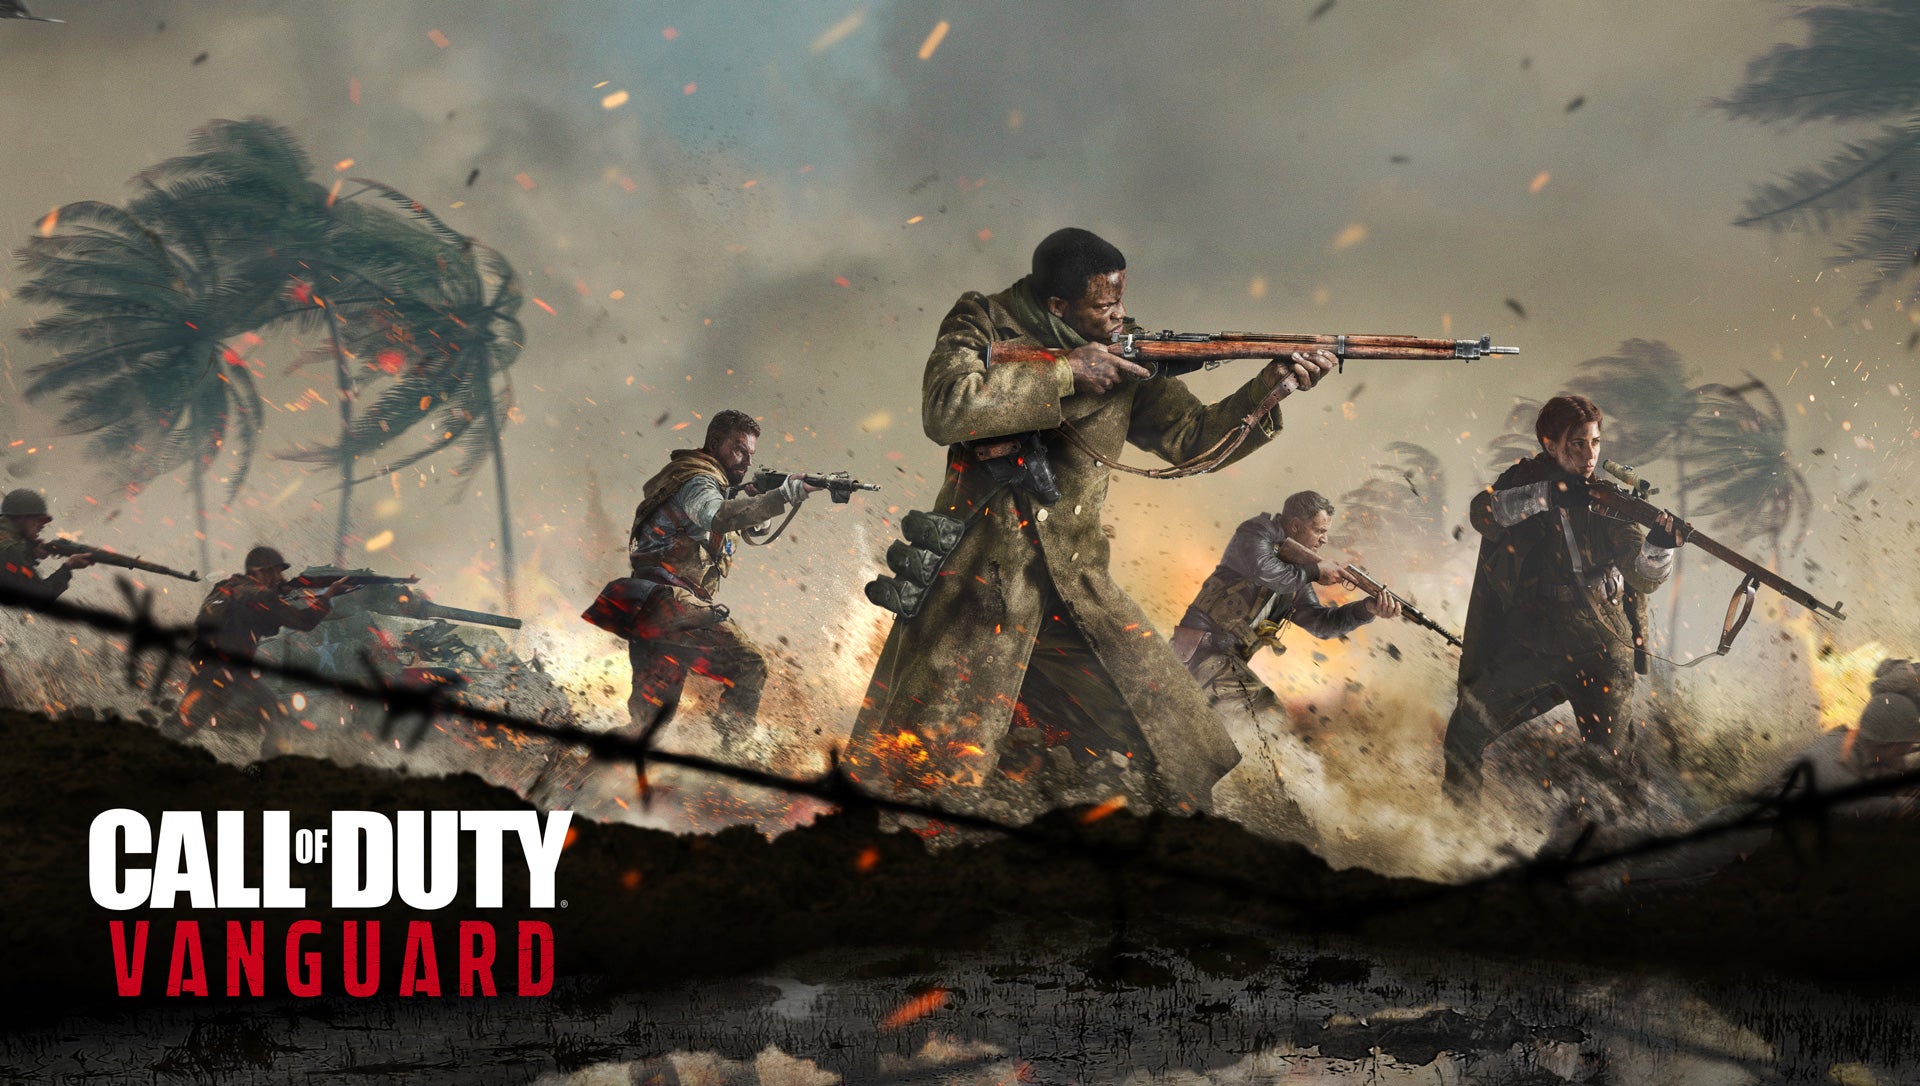 Image for Check out the Call of Duty: Vanguard story trailer here